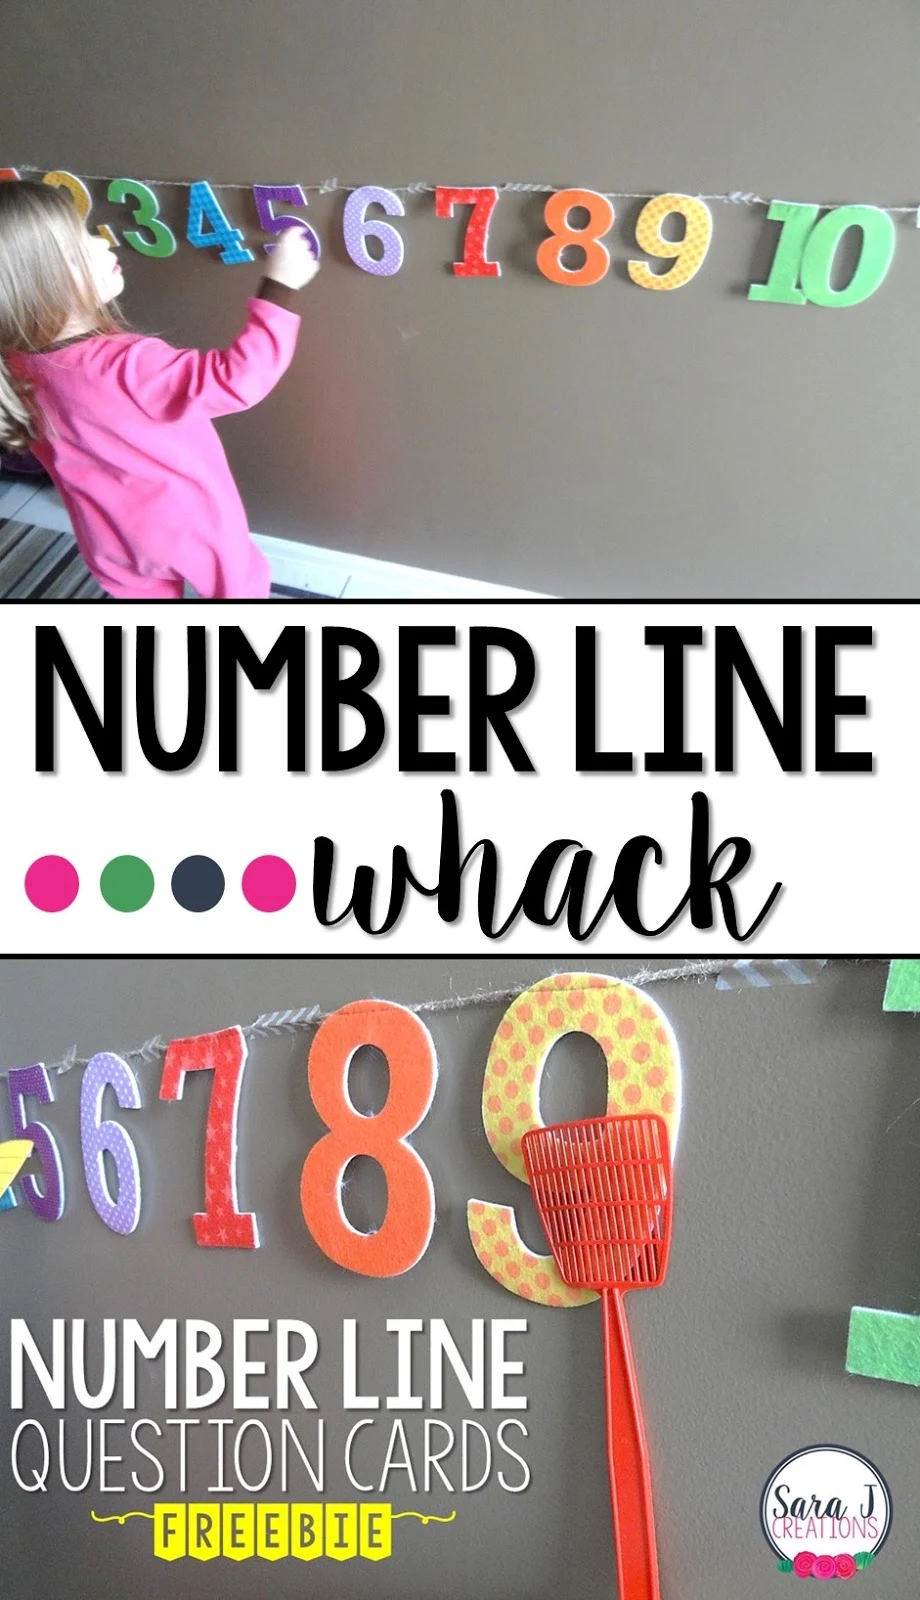 Number line games to build number sense in young learners